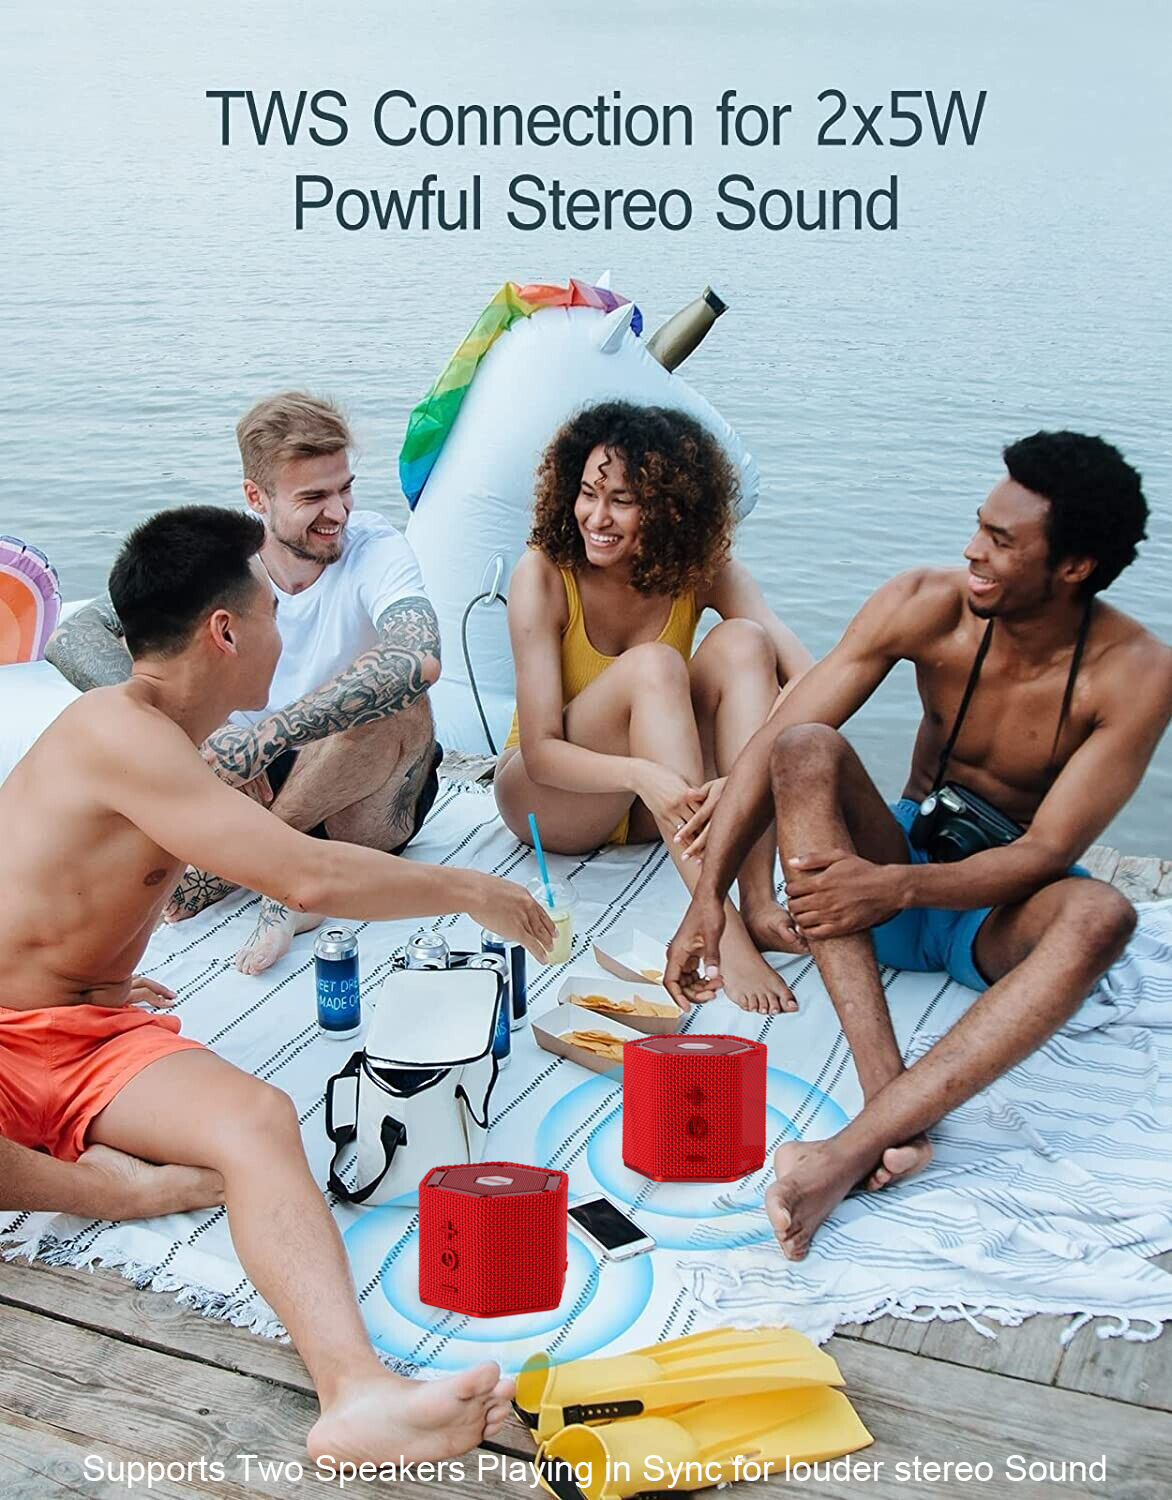 Speakers-Bluetooth-Speaker-Fully-Waterproof-Certified-IP68-Floating-Speaker-for-Indoor-and-Outdoor-Use-Perfect-For-The-Beach-Pool-Or-Shower-7